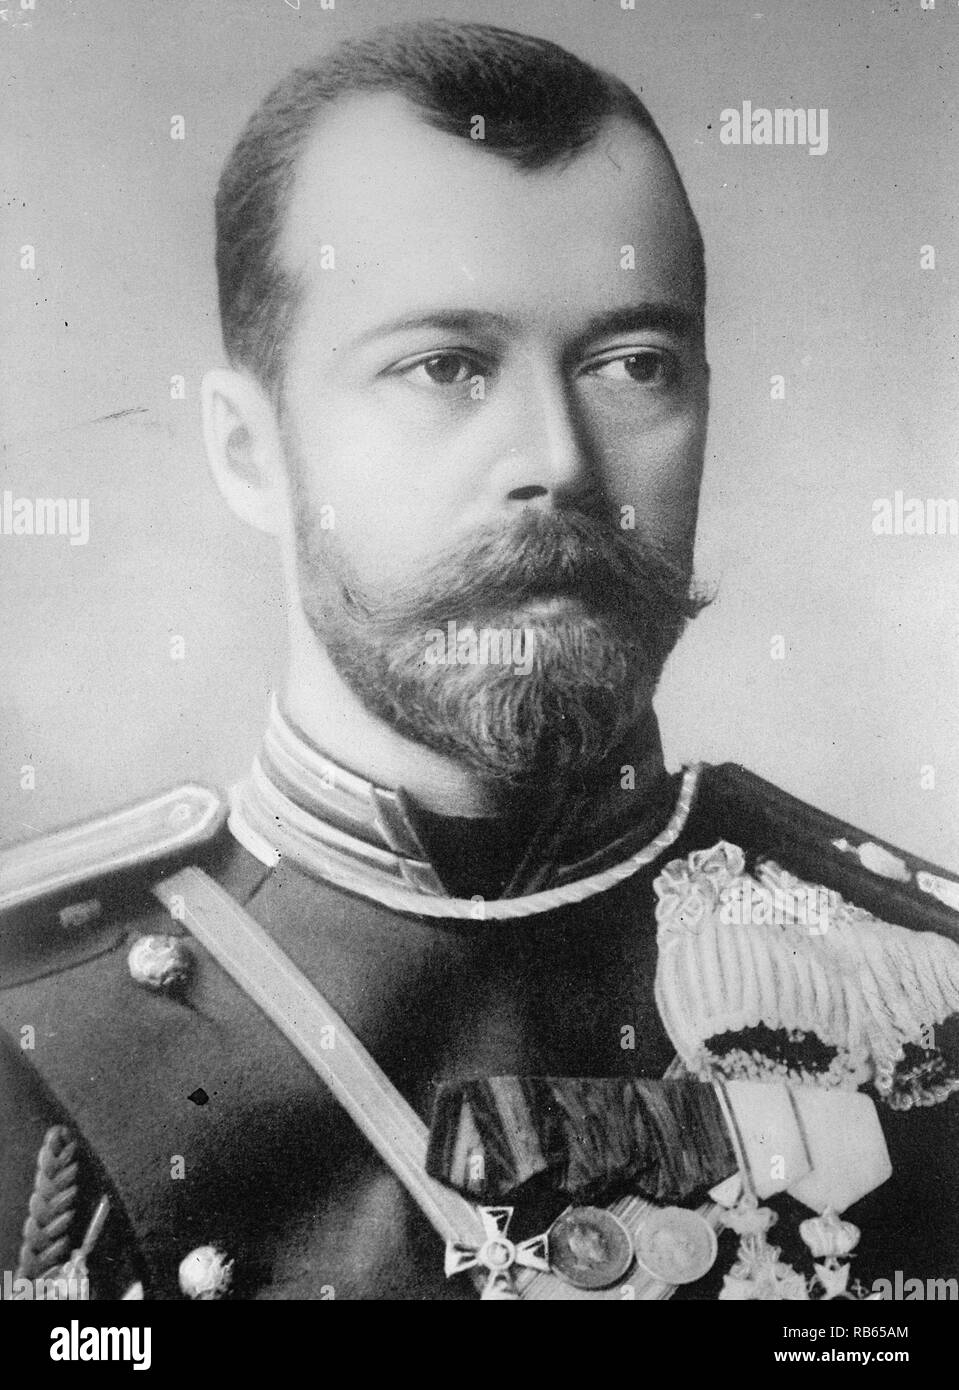 Photograph of Emperor Nicholas the II, the last Tsar of Russia. May 18 1868 - July 17 1918. Stock Photo